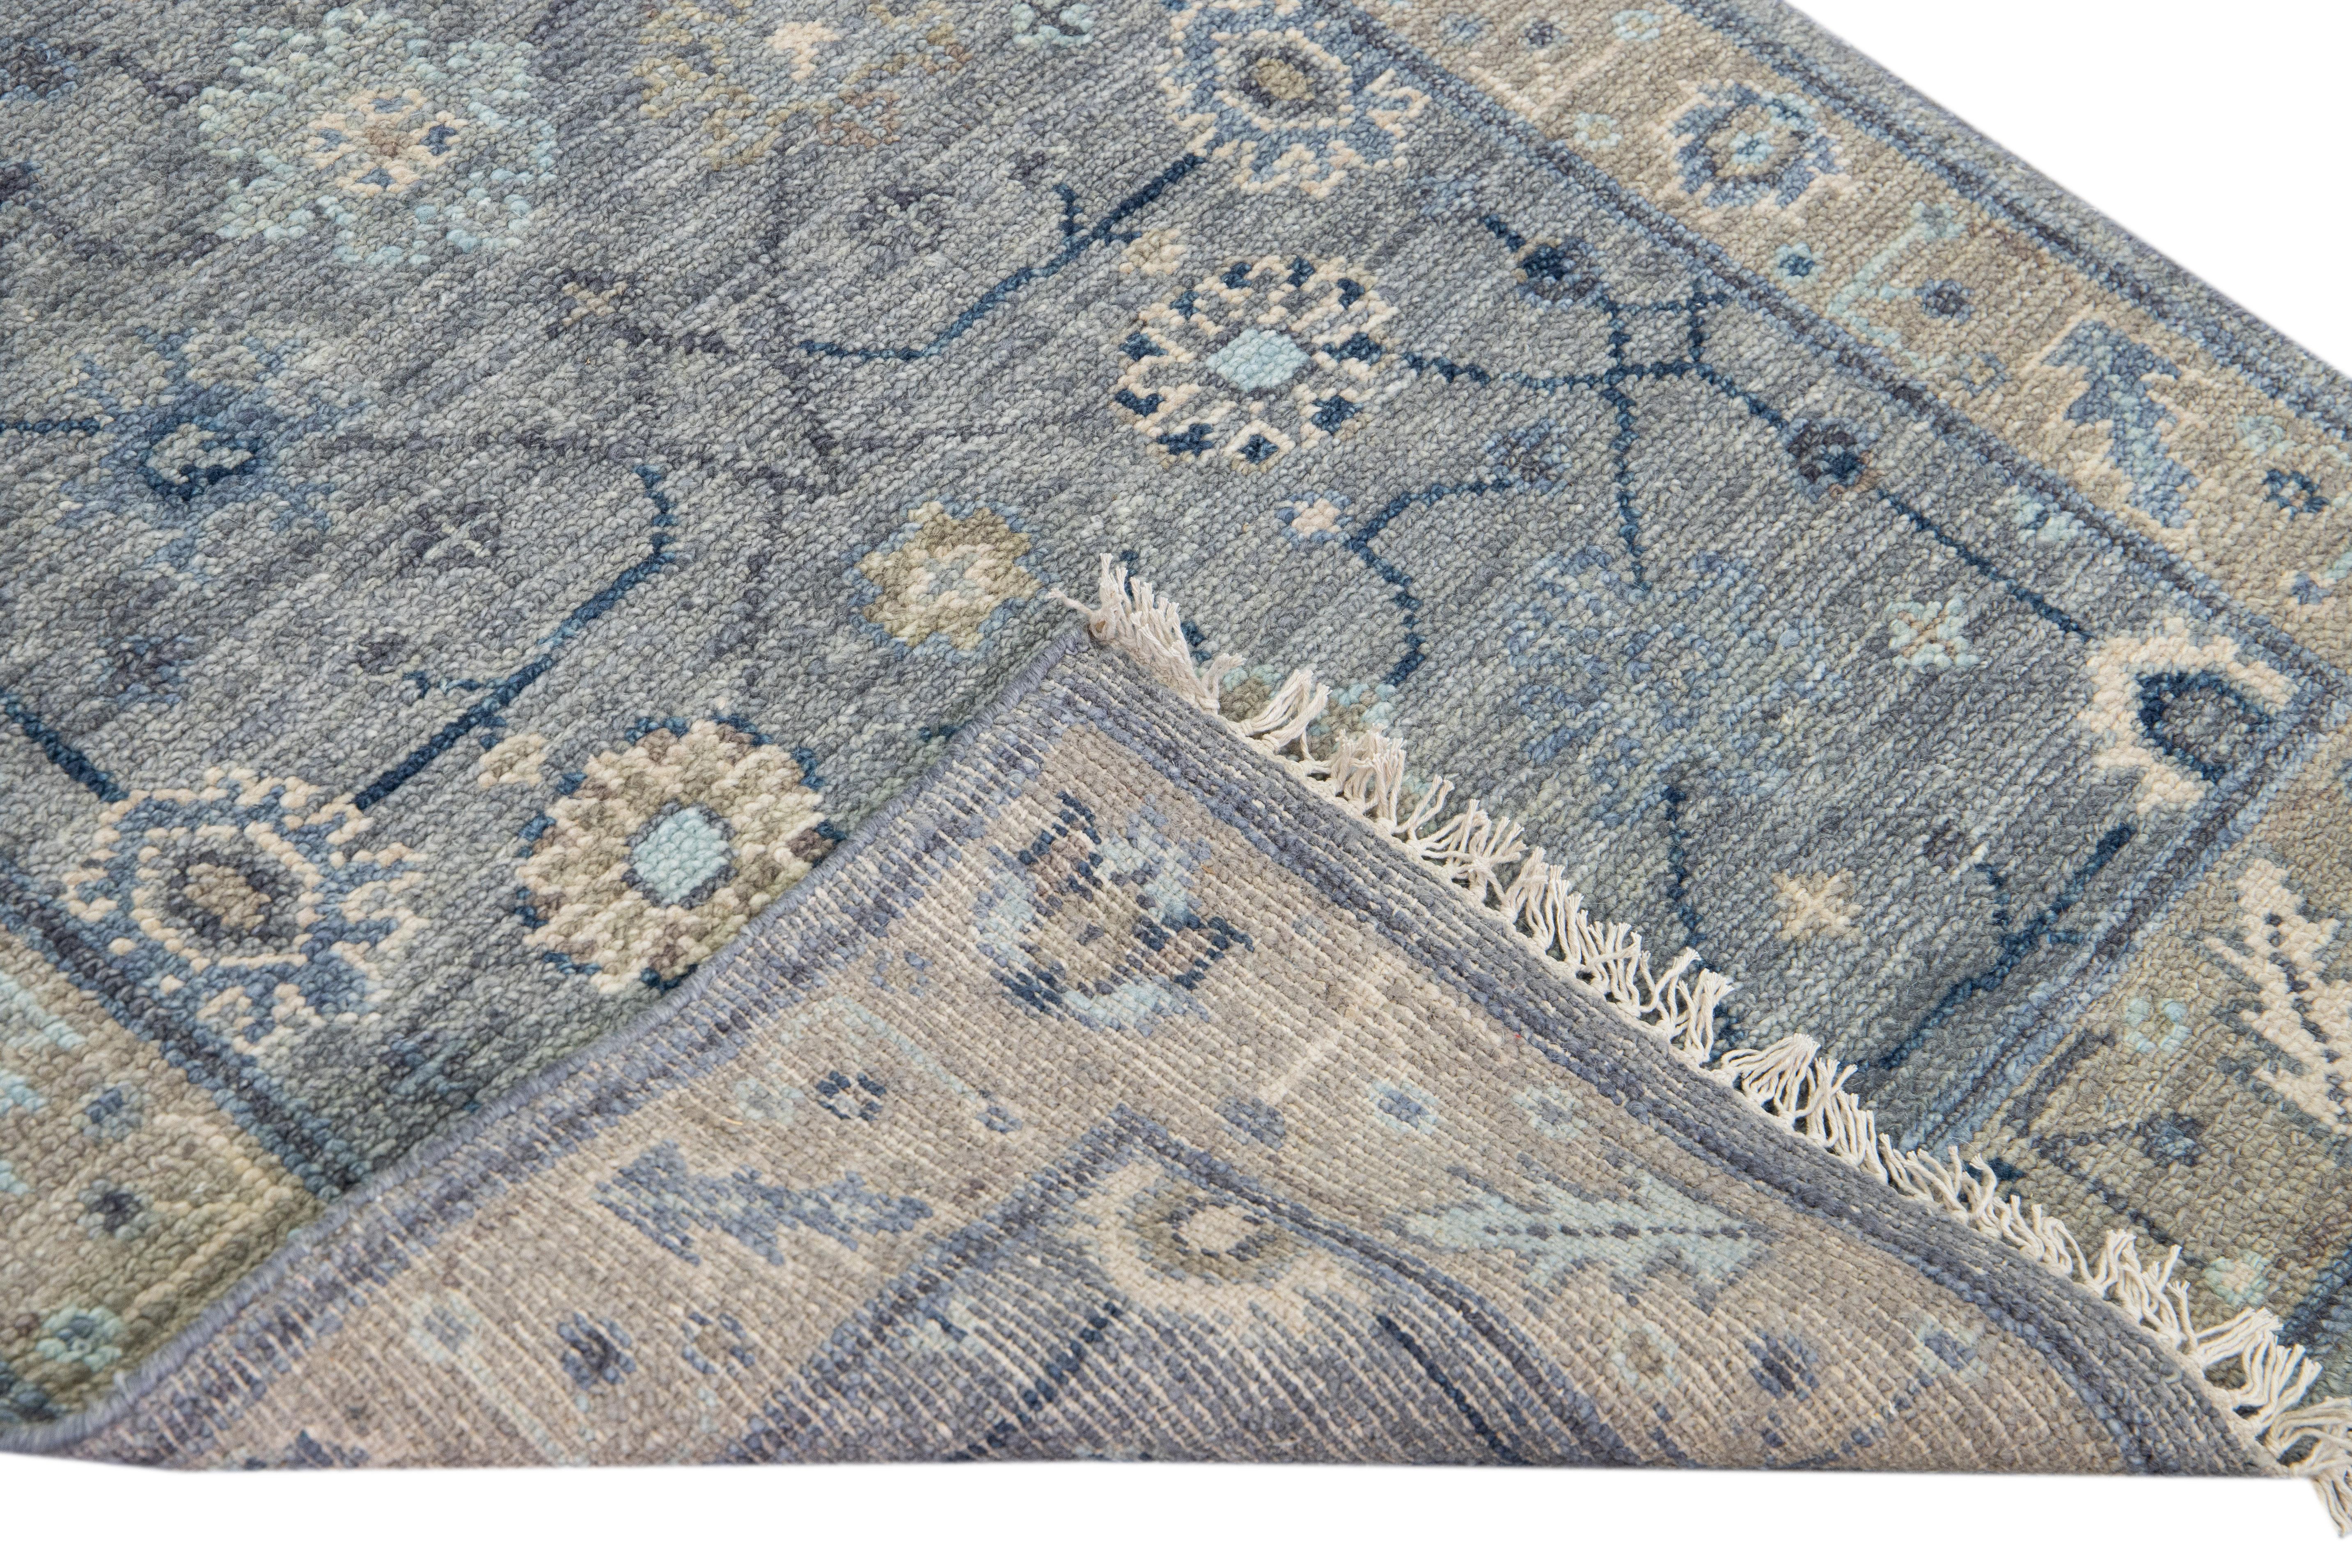 Beautiful modern Oushak hand-knotted wool runner with a gray field. This Oushak rug has a beige designed frame and blue accents all over a gorgeous floral design.

This rug measures 3' x 16'.

Our rugs are professional cleaning before shipping.